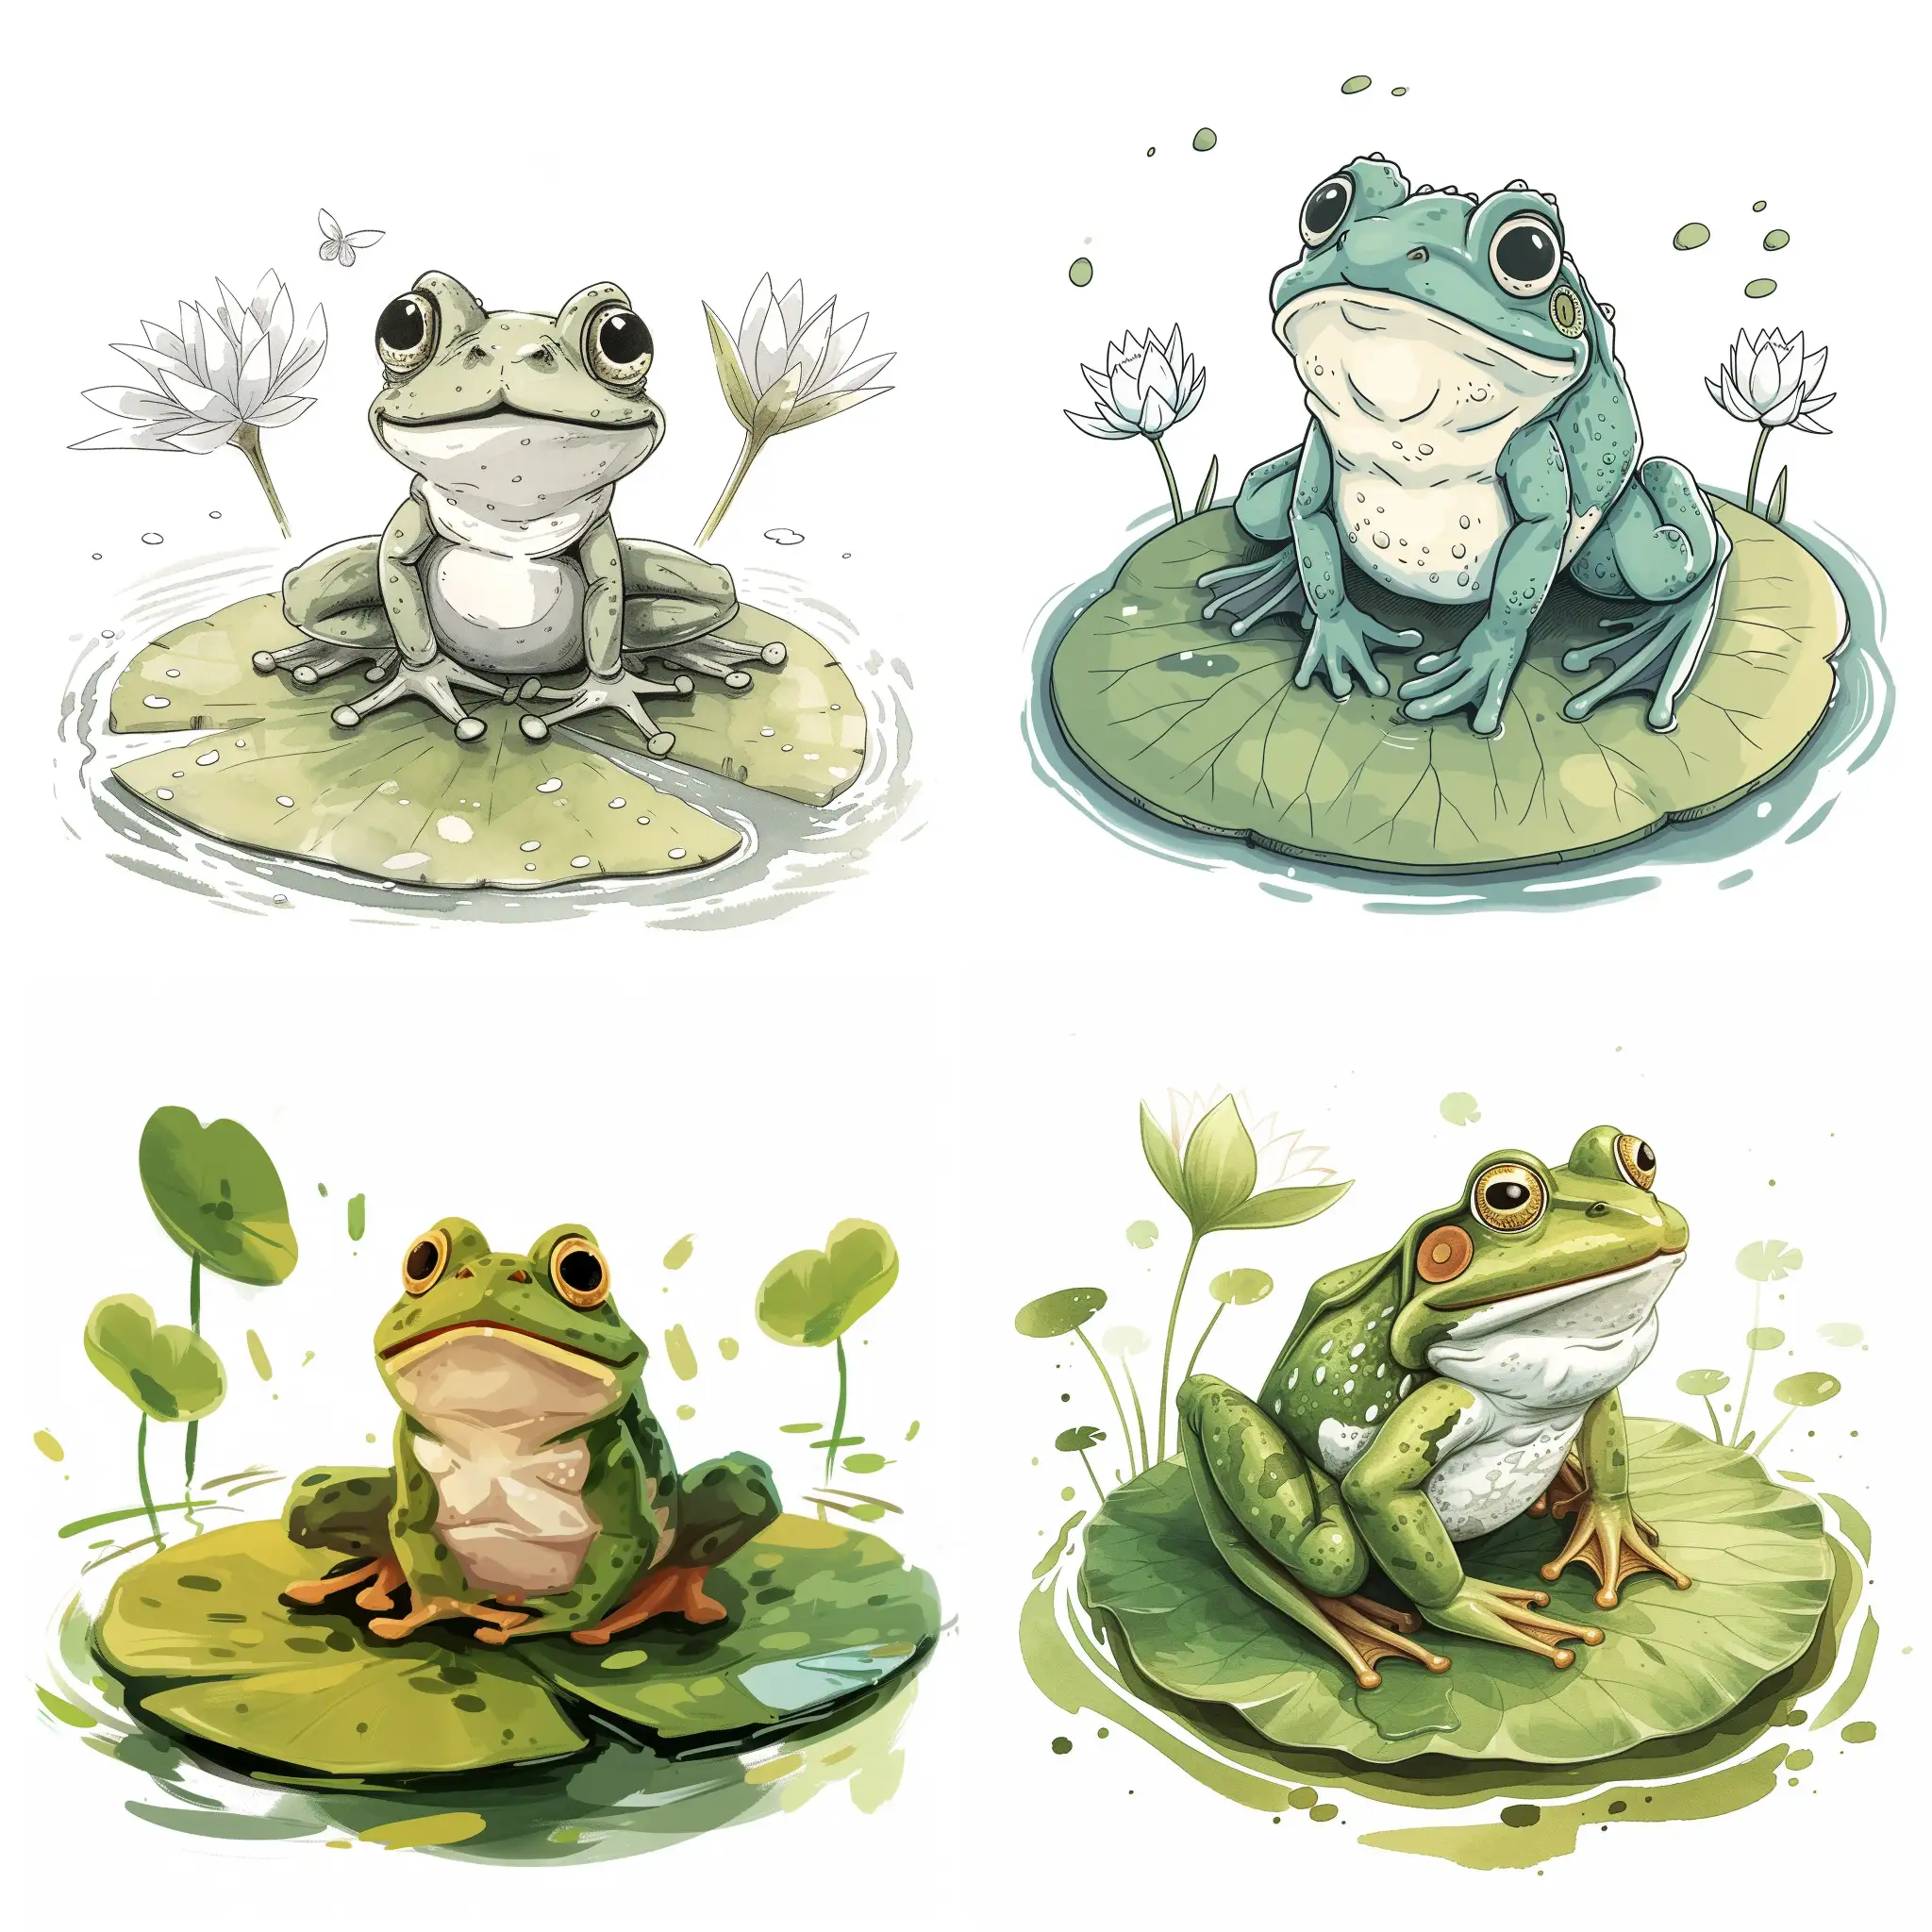  A cute frog on a lily pad in a swamp, many expressions, chubby, funky, swag, close-up, detailed ink illustration, colorful, pixar, isolated on white background, in flat style